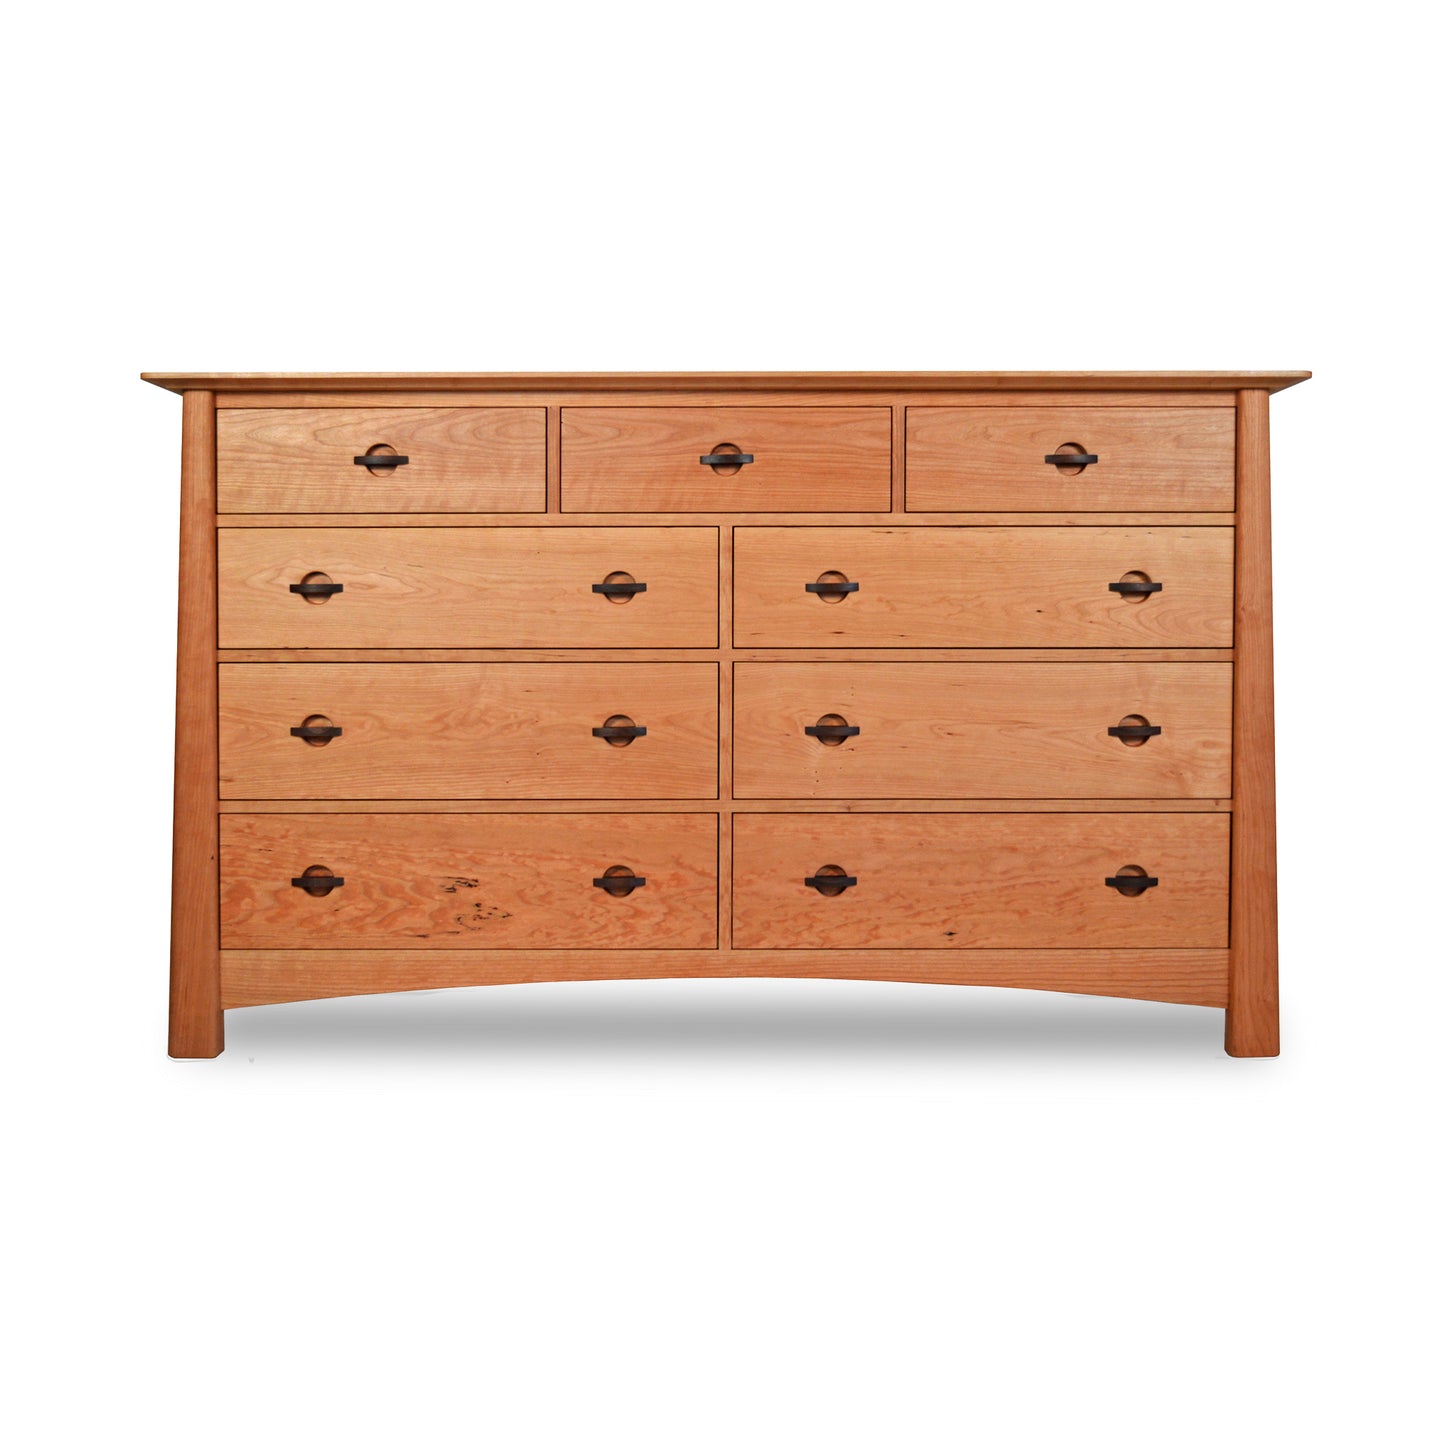 An eco-friendly image of a Cherry Moon 9-Drawer Dresser from Maple Corner Woodworks, with drawers made from sustainably harvested solid woods.